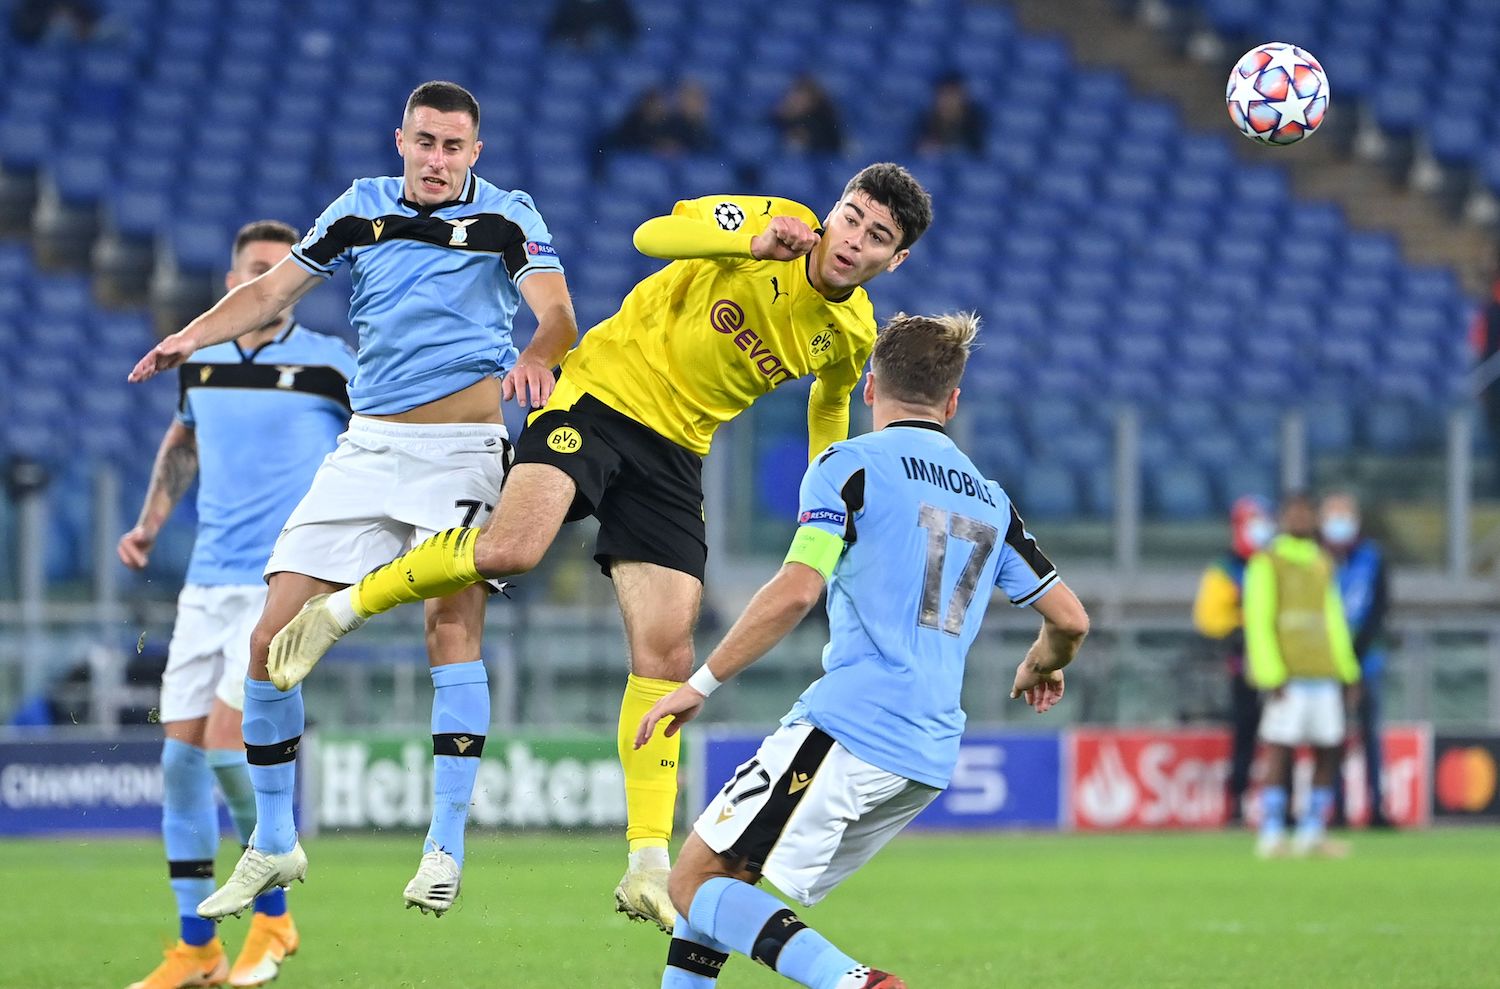 Borussia Dortmund's American forward Giovanni Reyna (C) is challenged by Lazio's Montenegrin midfielder Adam Marusic during the UEFA Champions League first round first leg, group F, football match between Lazio and Borussia Dortmund, at the Olympic stadium in Rome, on October 20, 2020. (Photo by Alberto PIZZOLI / AFP) (Photo by ALBERTO PIZZOLI/AFP via Getty Images)